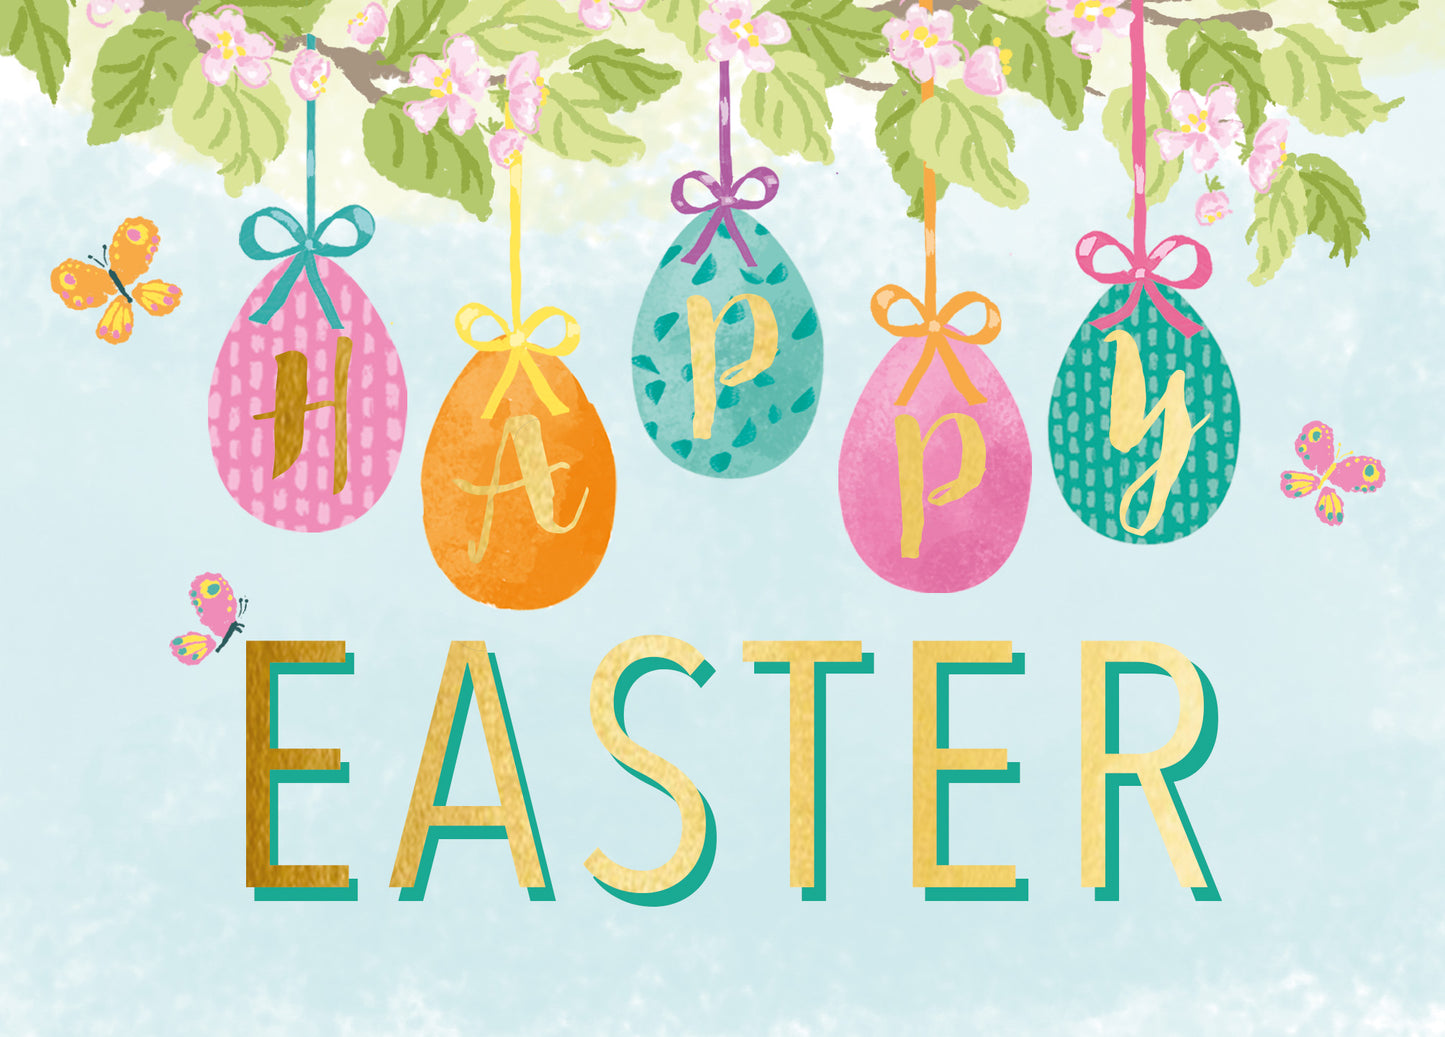 Happy Easter Egg-cellent Easter Tree Pop Up Greeting Card